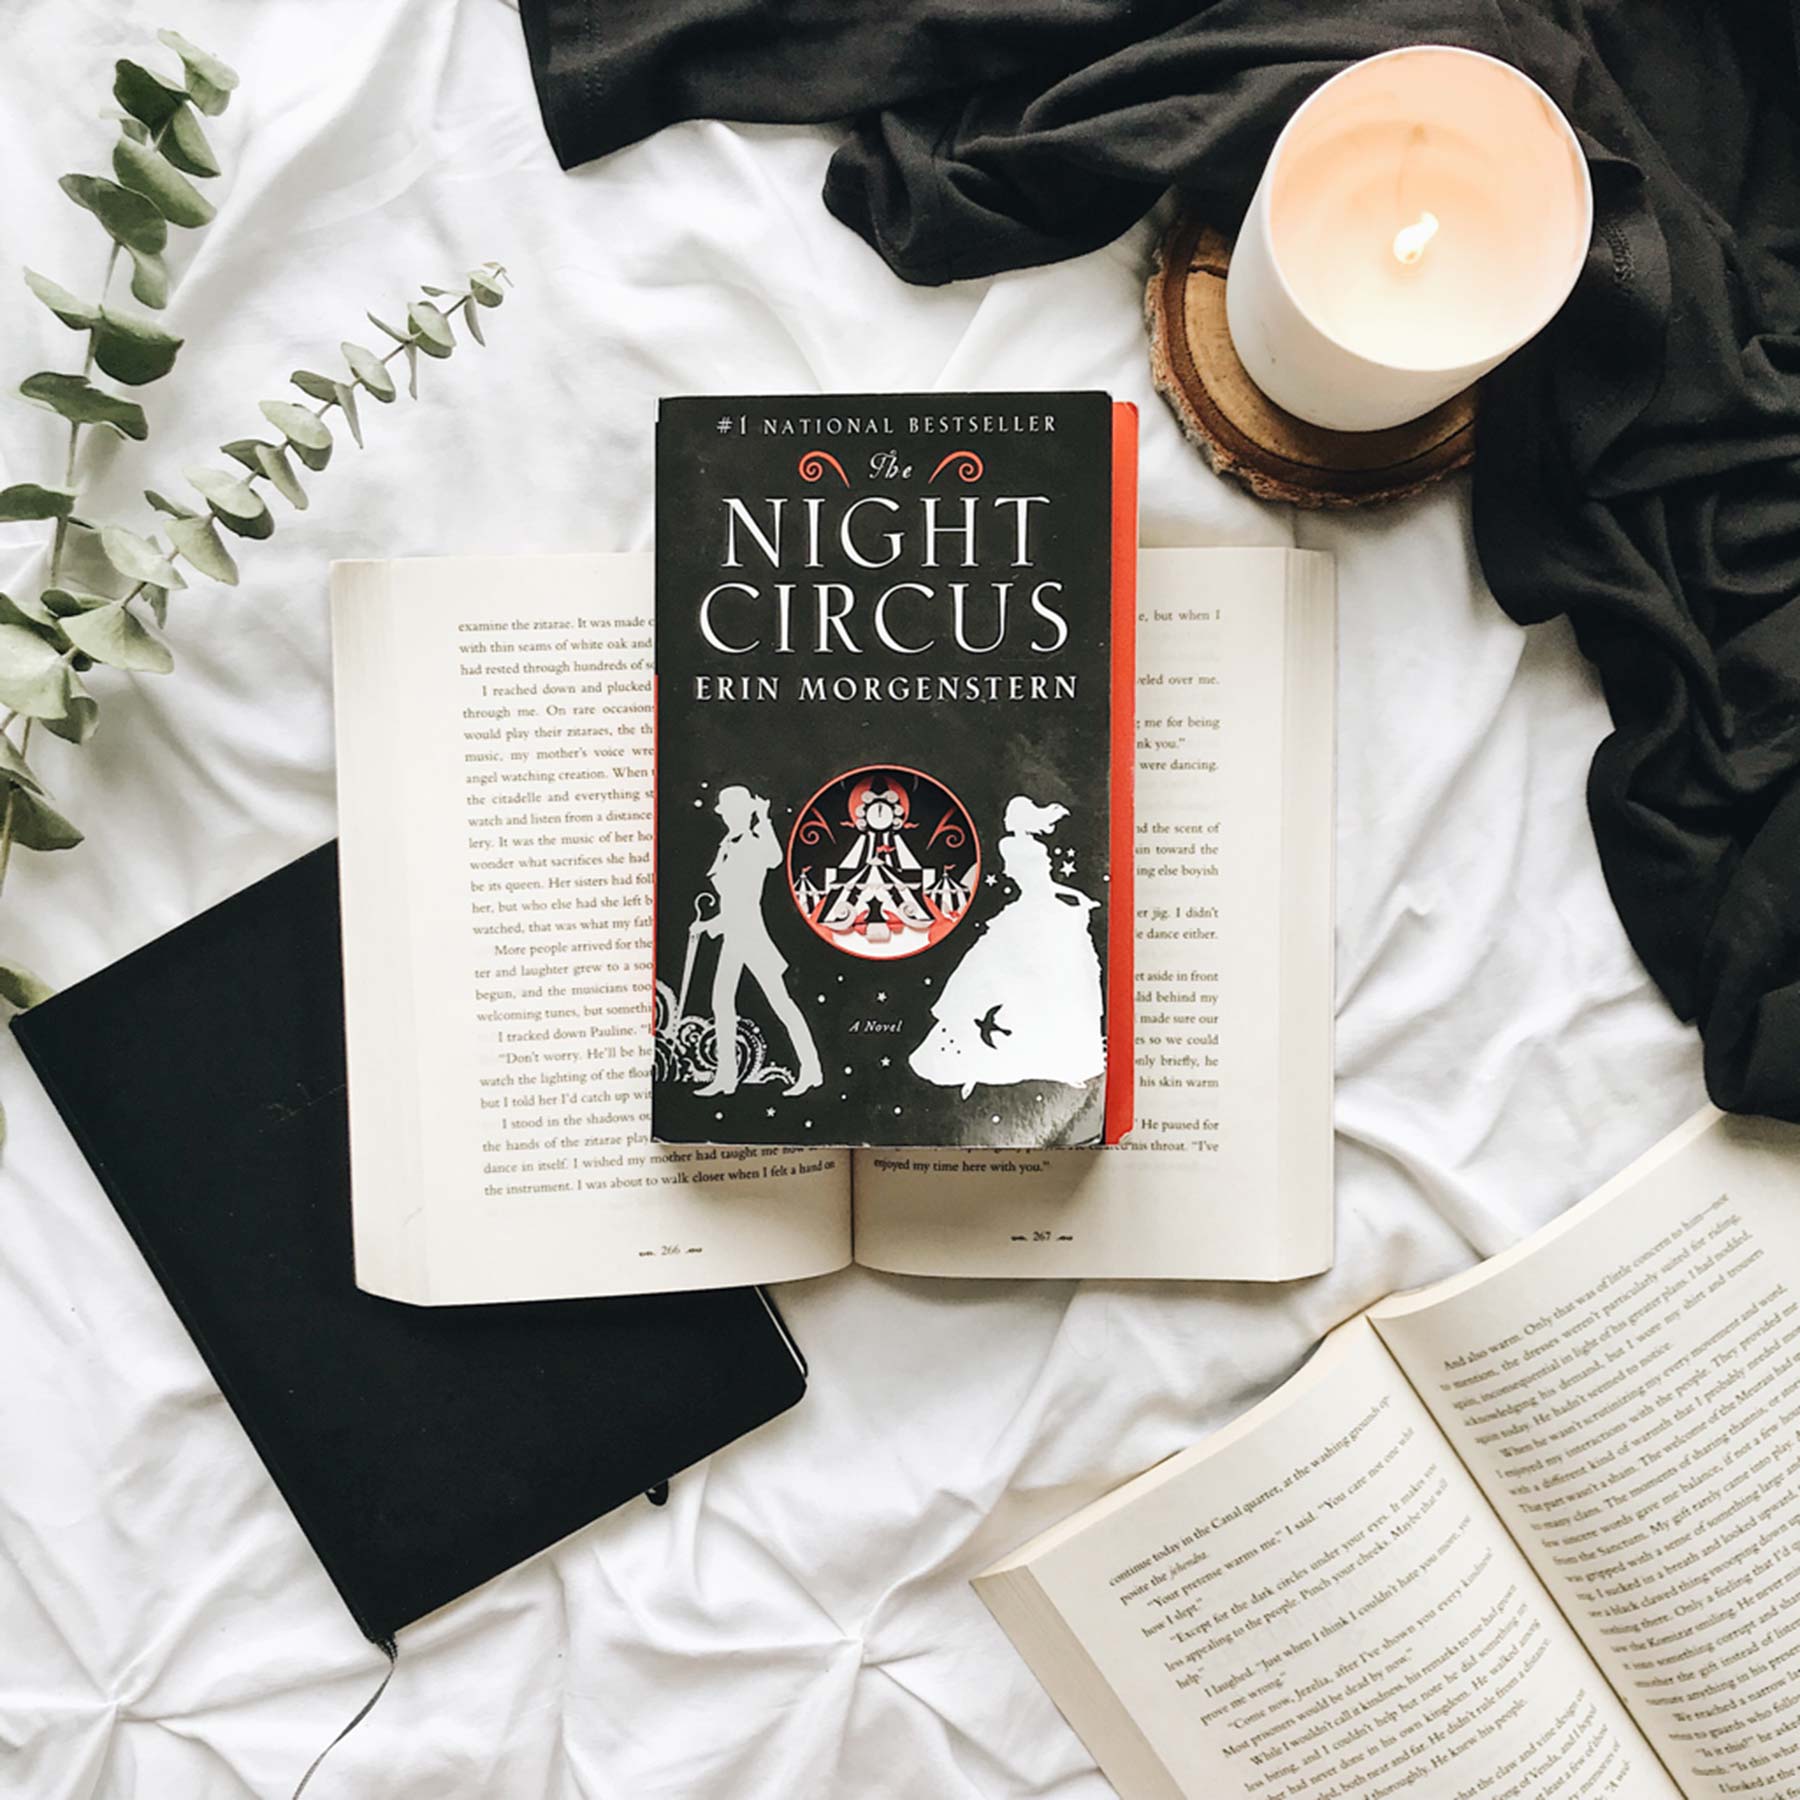 the night circus reading book on a bed by candle light